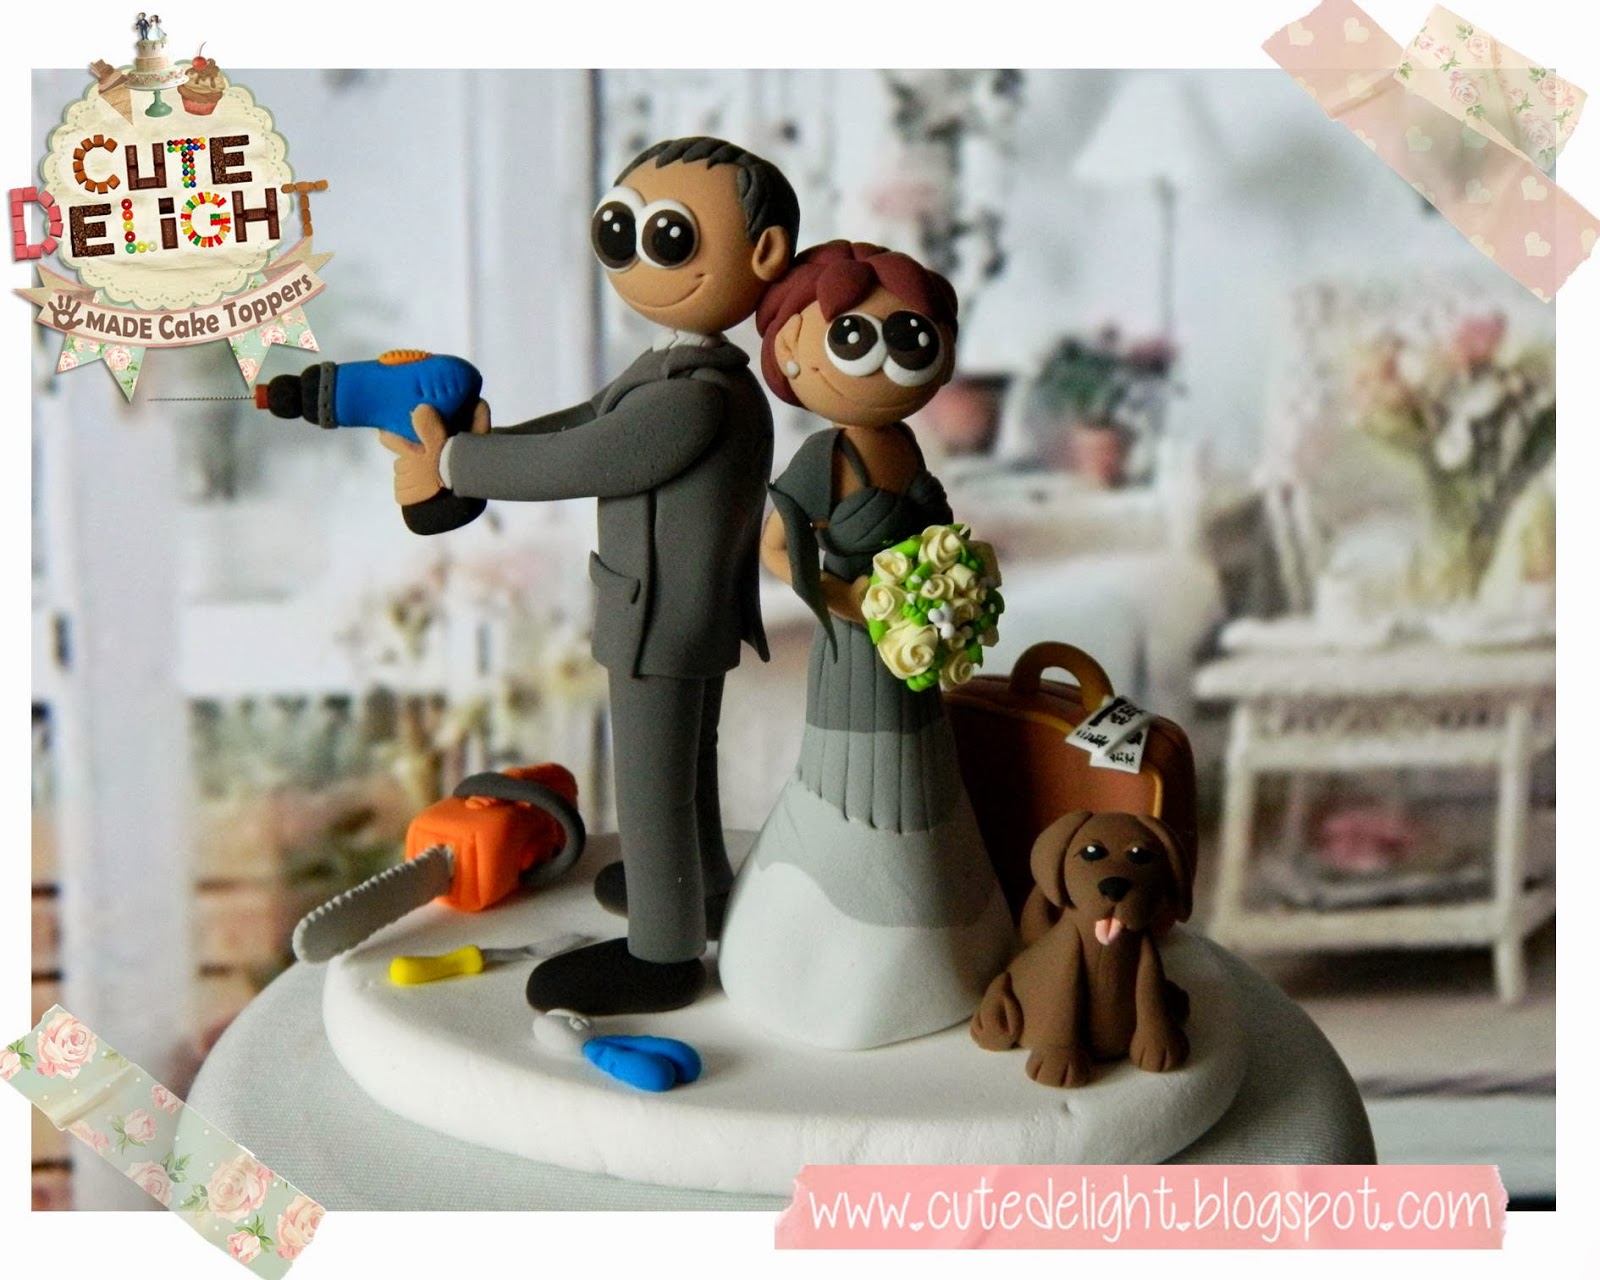 Wedding cake toppers, Custom Cake Topper, Funny cake toppers, Cake topper,  Cake toppers, : Wedding Anniversary Cake Topper Custom Made - Fix-it-All  Husband and Wife with Roses Bouquet and Dog